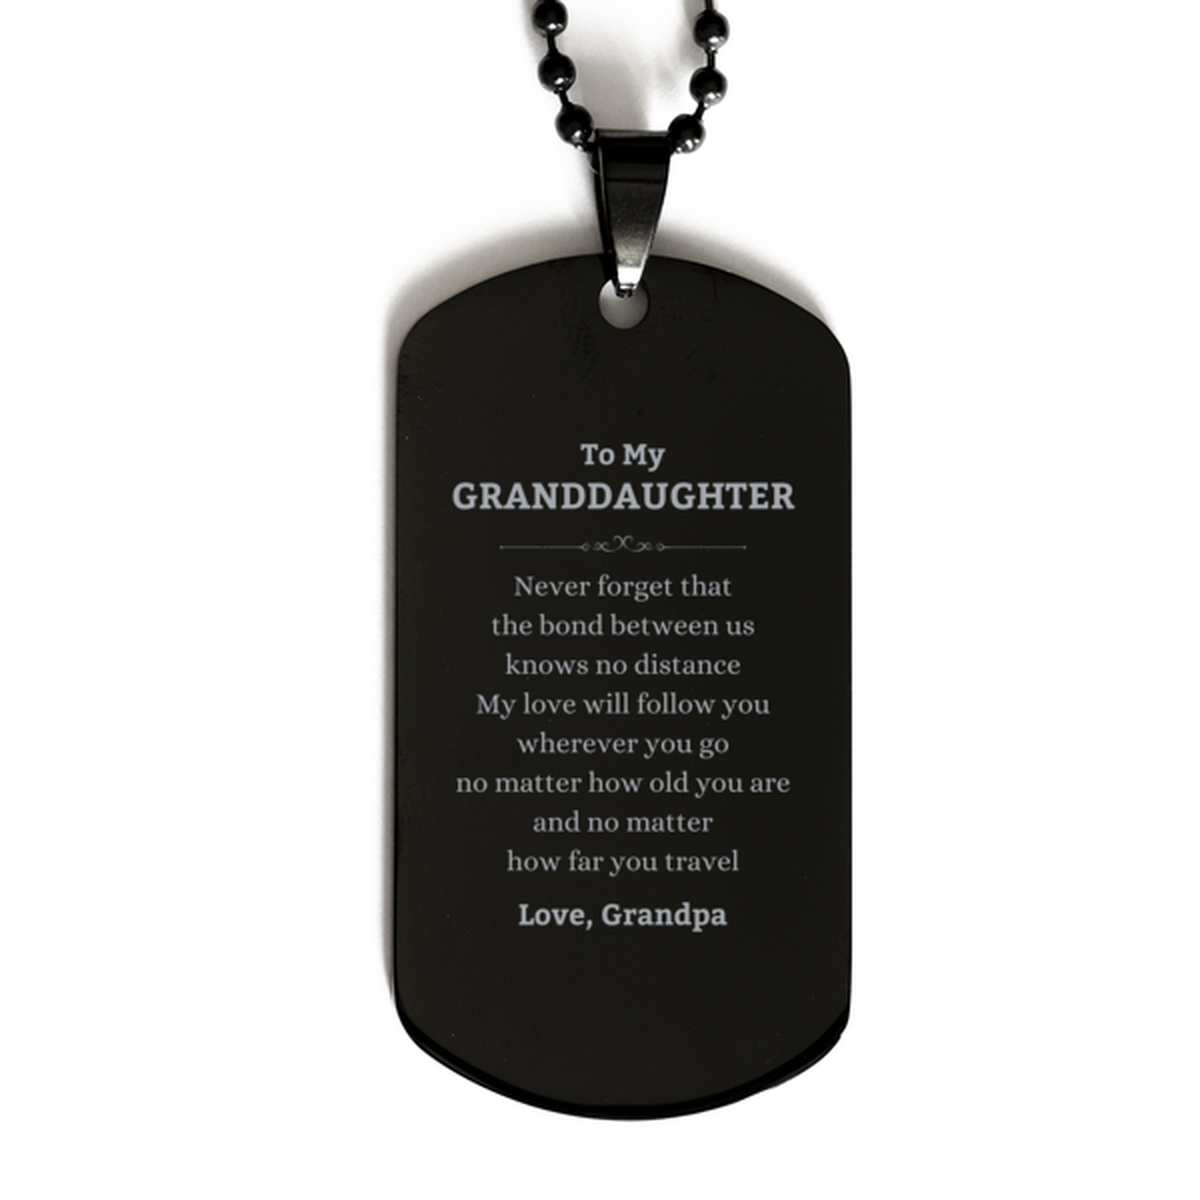 Granddaughter Birthday Gifts from Grandpa, Adjustable Black Dog Tag for Granddaughter Christmas Graduation Unique Gifts Granddaughter Never forget that the bond between us knows no distance. Love, Grandpa